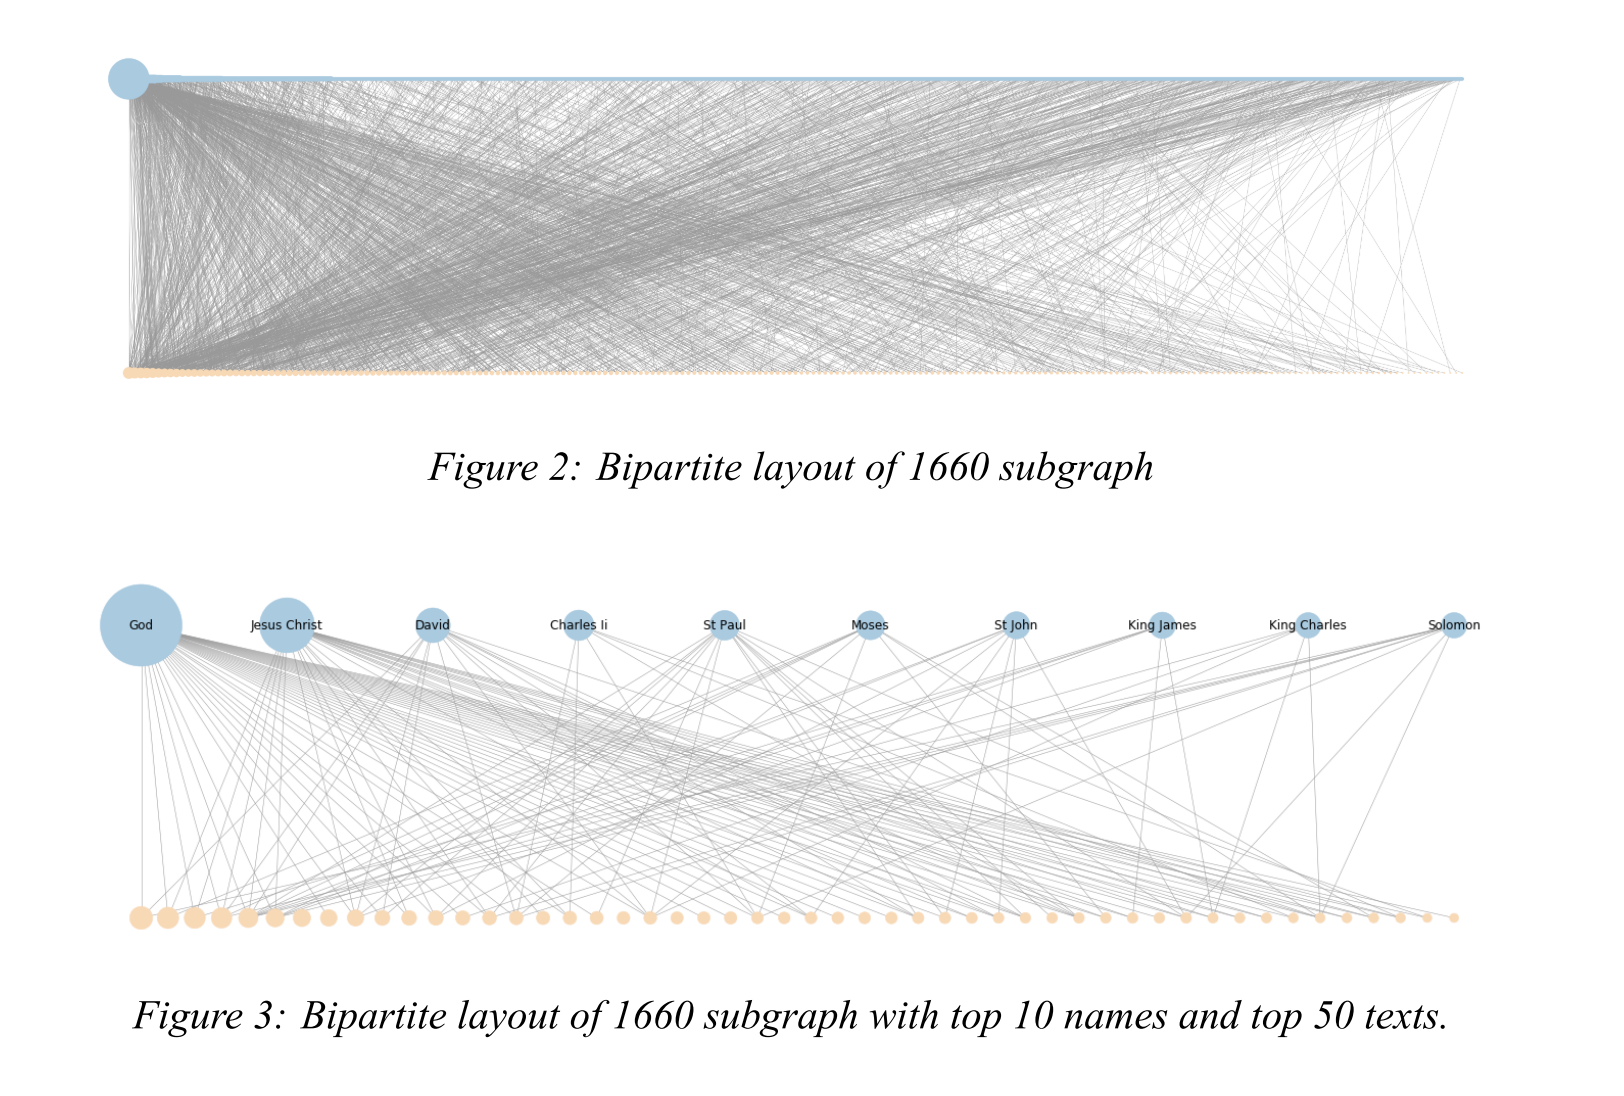 A visualization from the Imaginative Networks article showing two bipartite networks.